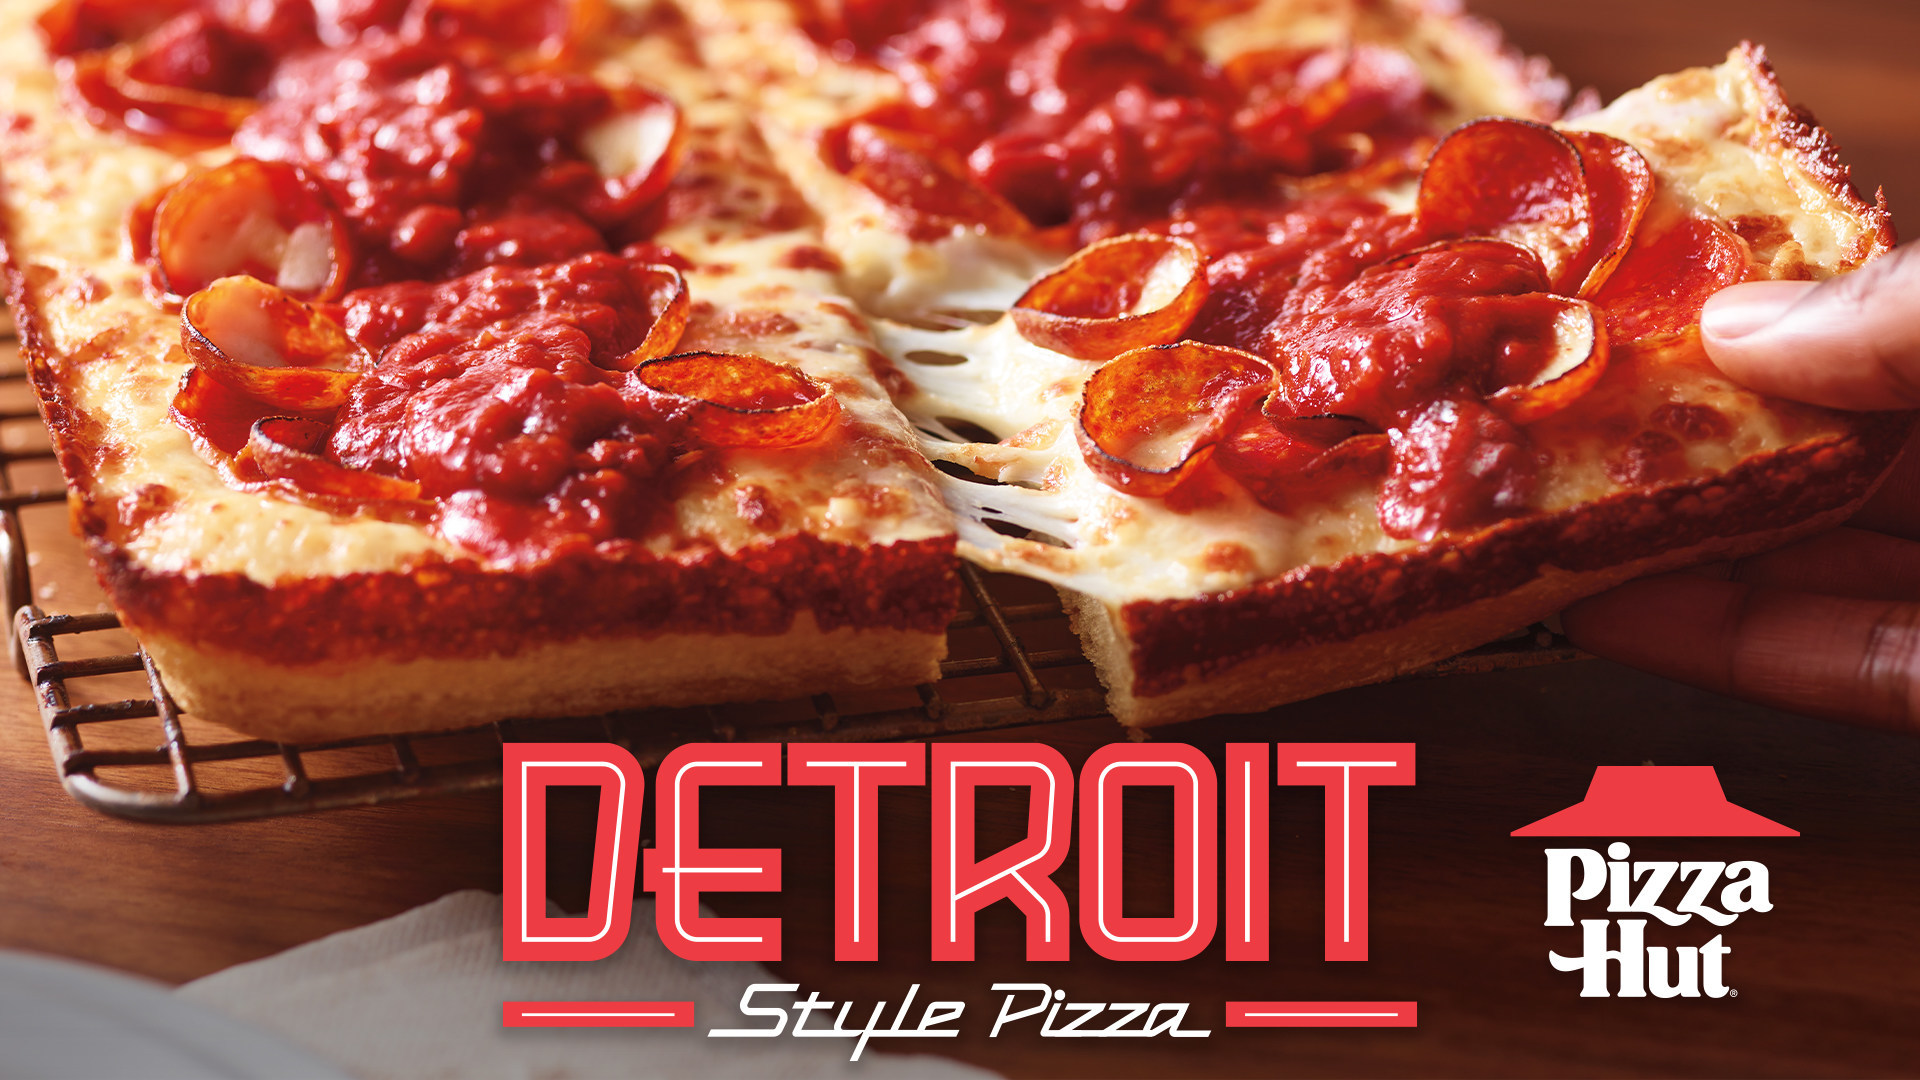 "AYO HEADED TO THE HUT RIGHT NOW!" DETROITSTYLE RETURNS TO PIZZA HUT